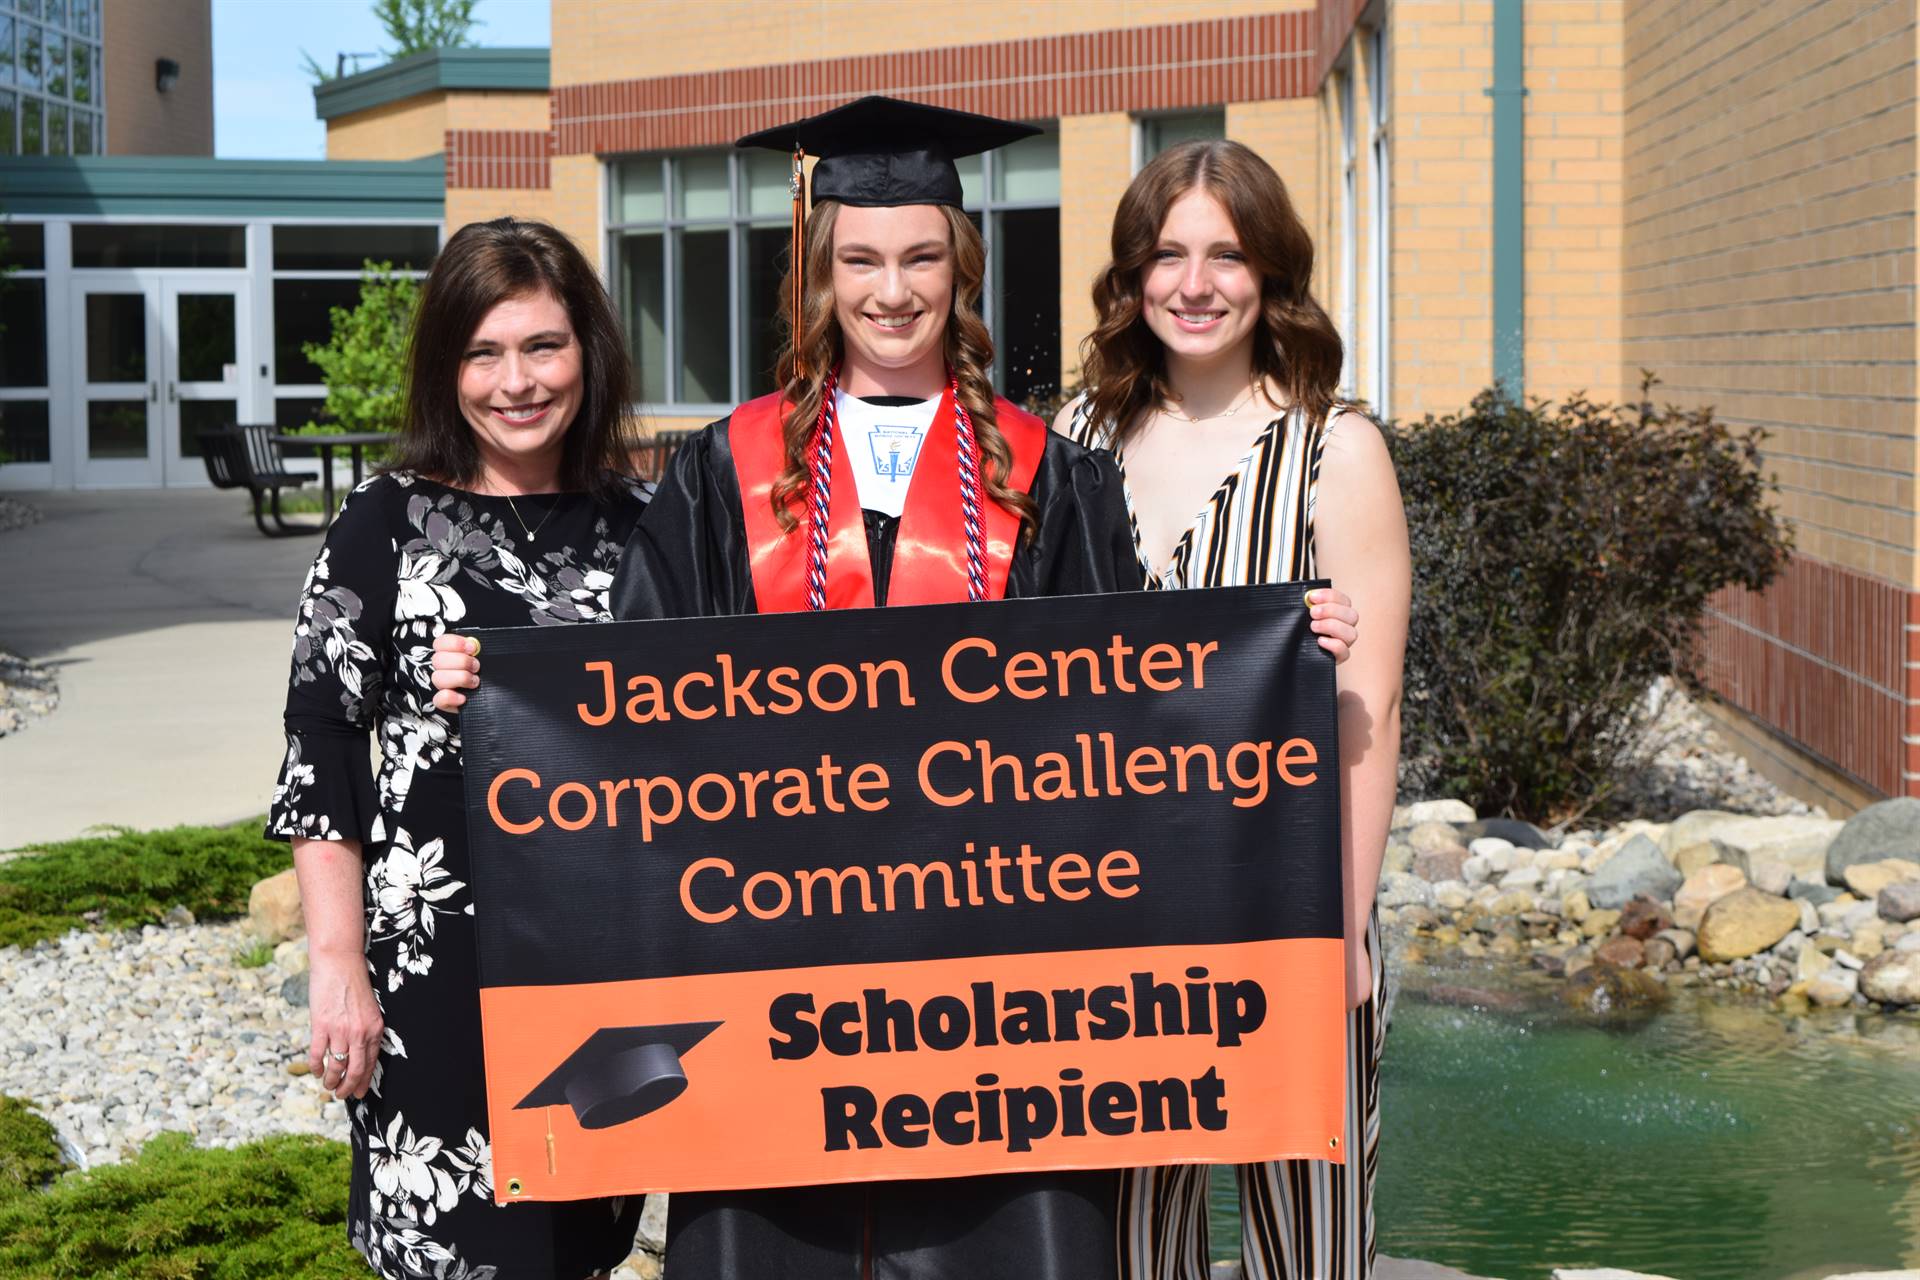 Brianna Fitzgerald Corporate Challenge Committee Scholarship